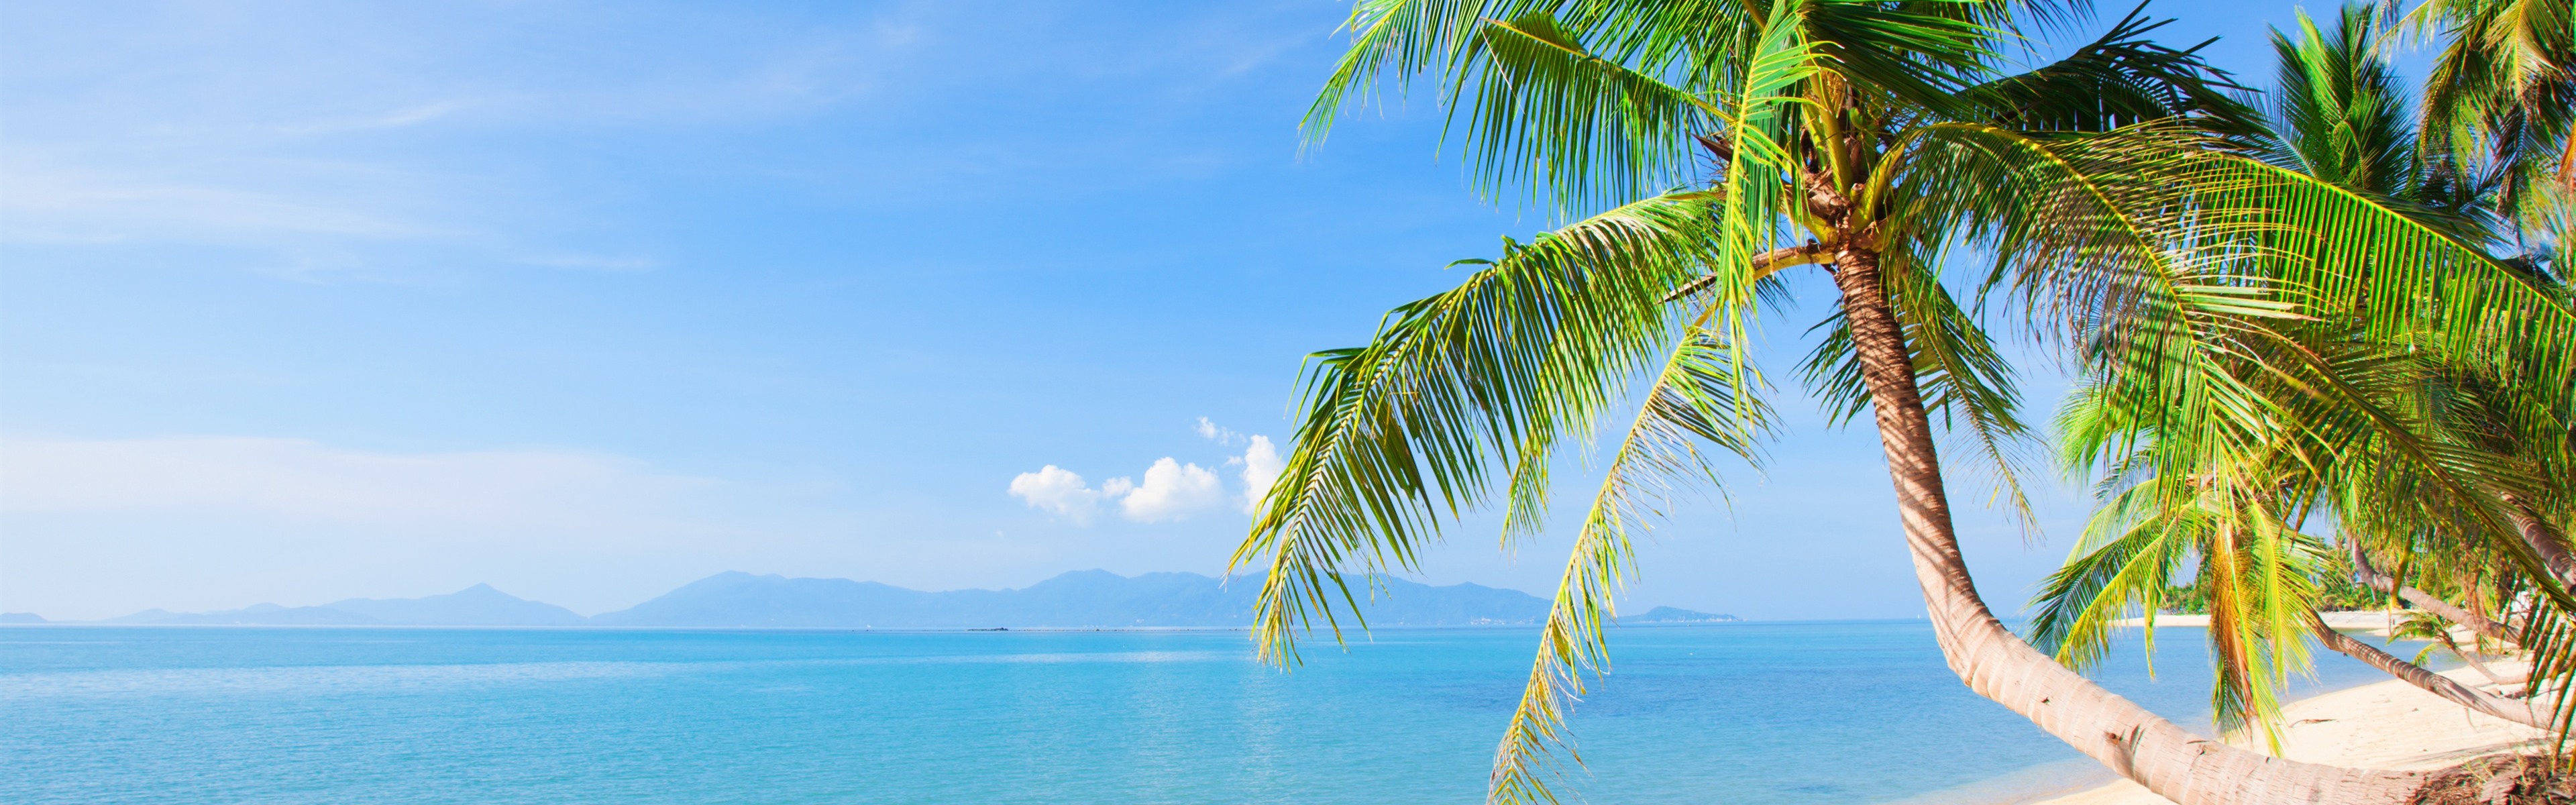 Wallpaper Beach, palm trees, sea, tropical, summer 3840x2160 UHD 4K Picture, Image